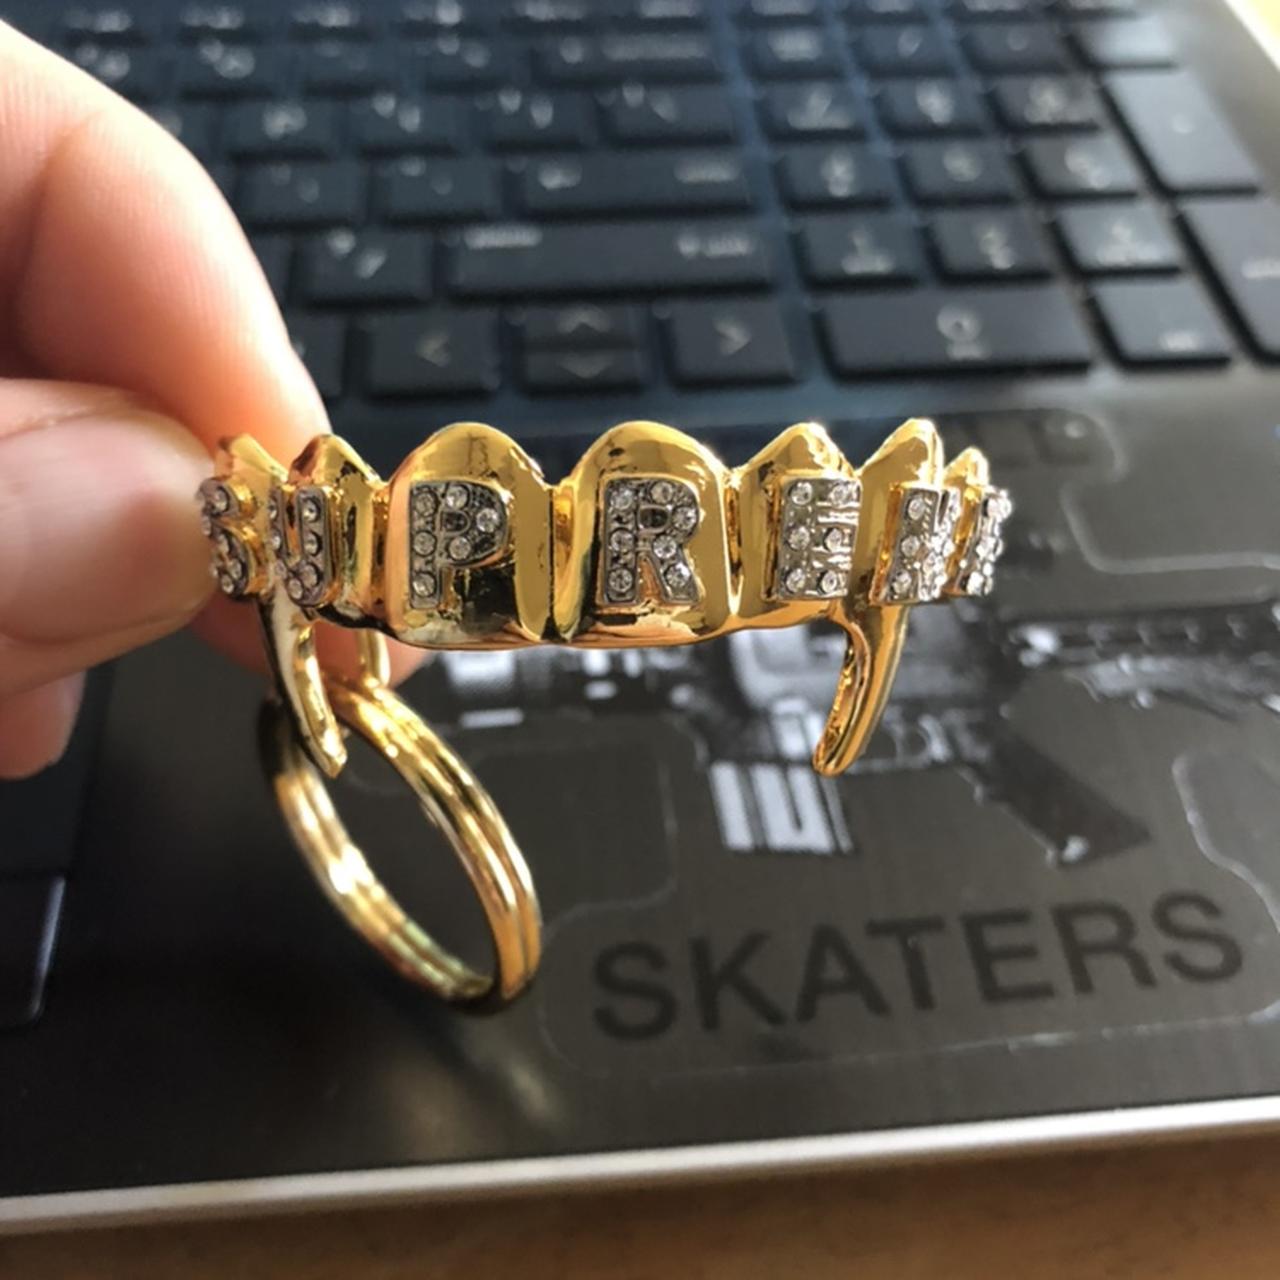 supreme fronts keychain gold